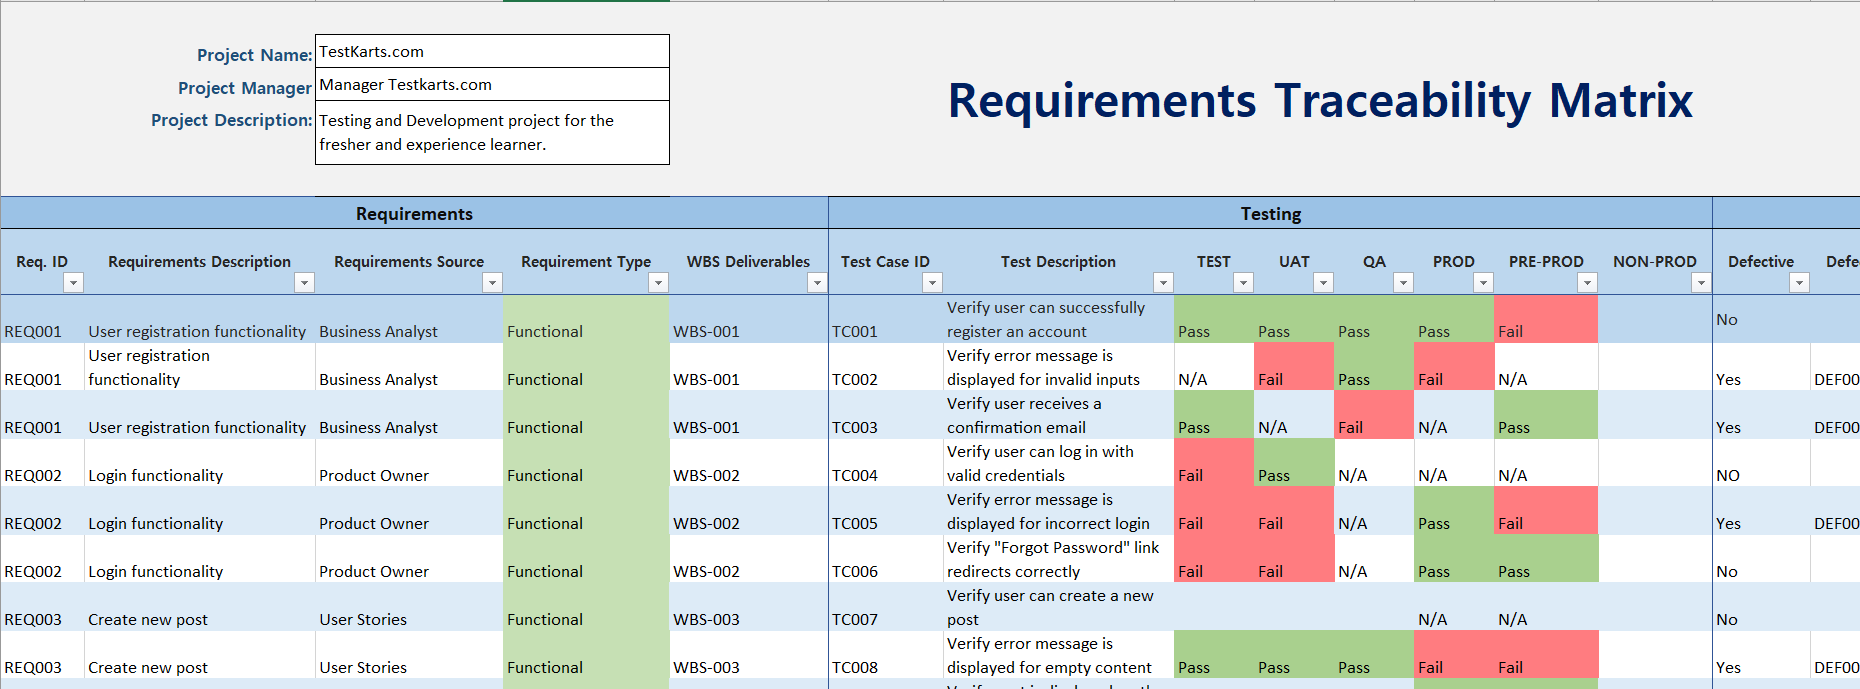 Requirements Traceability Matrix(RTM) With Example | TestKarts